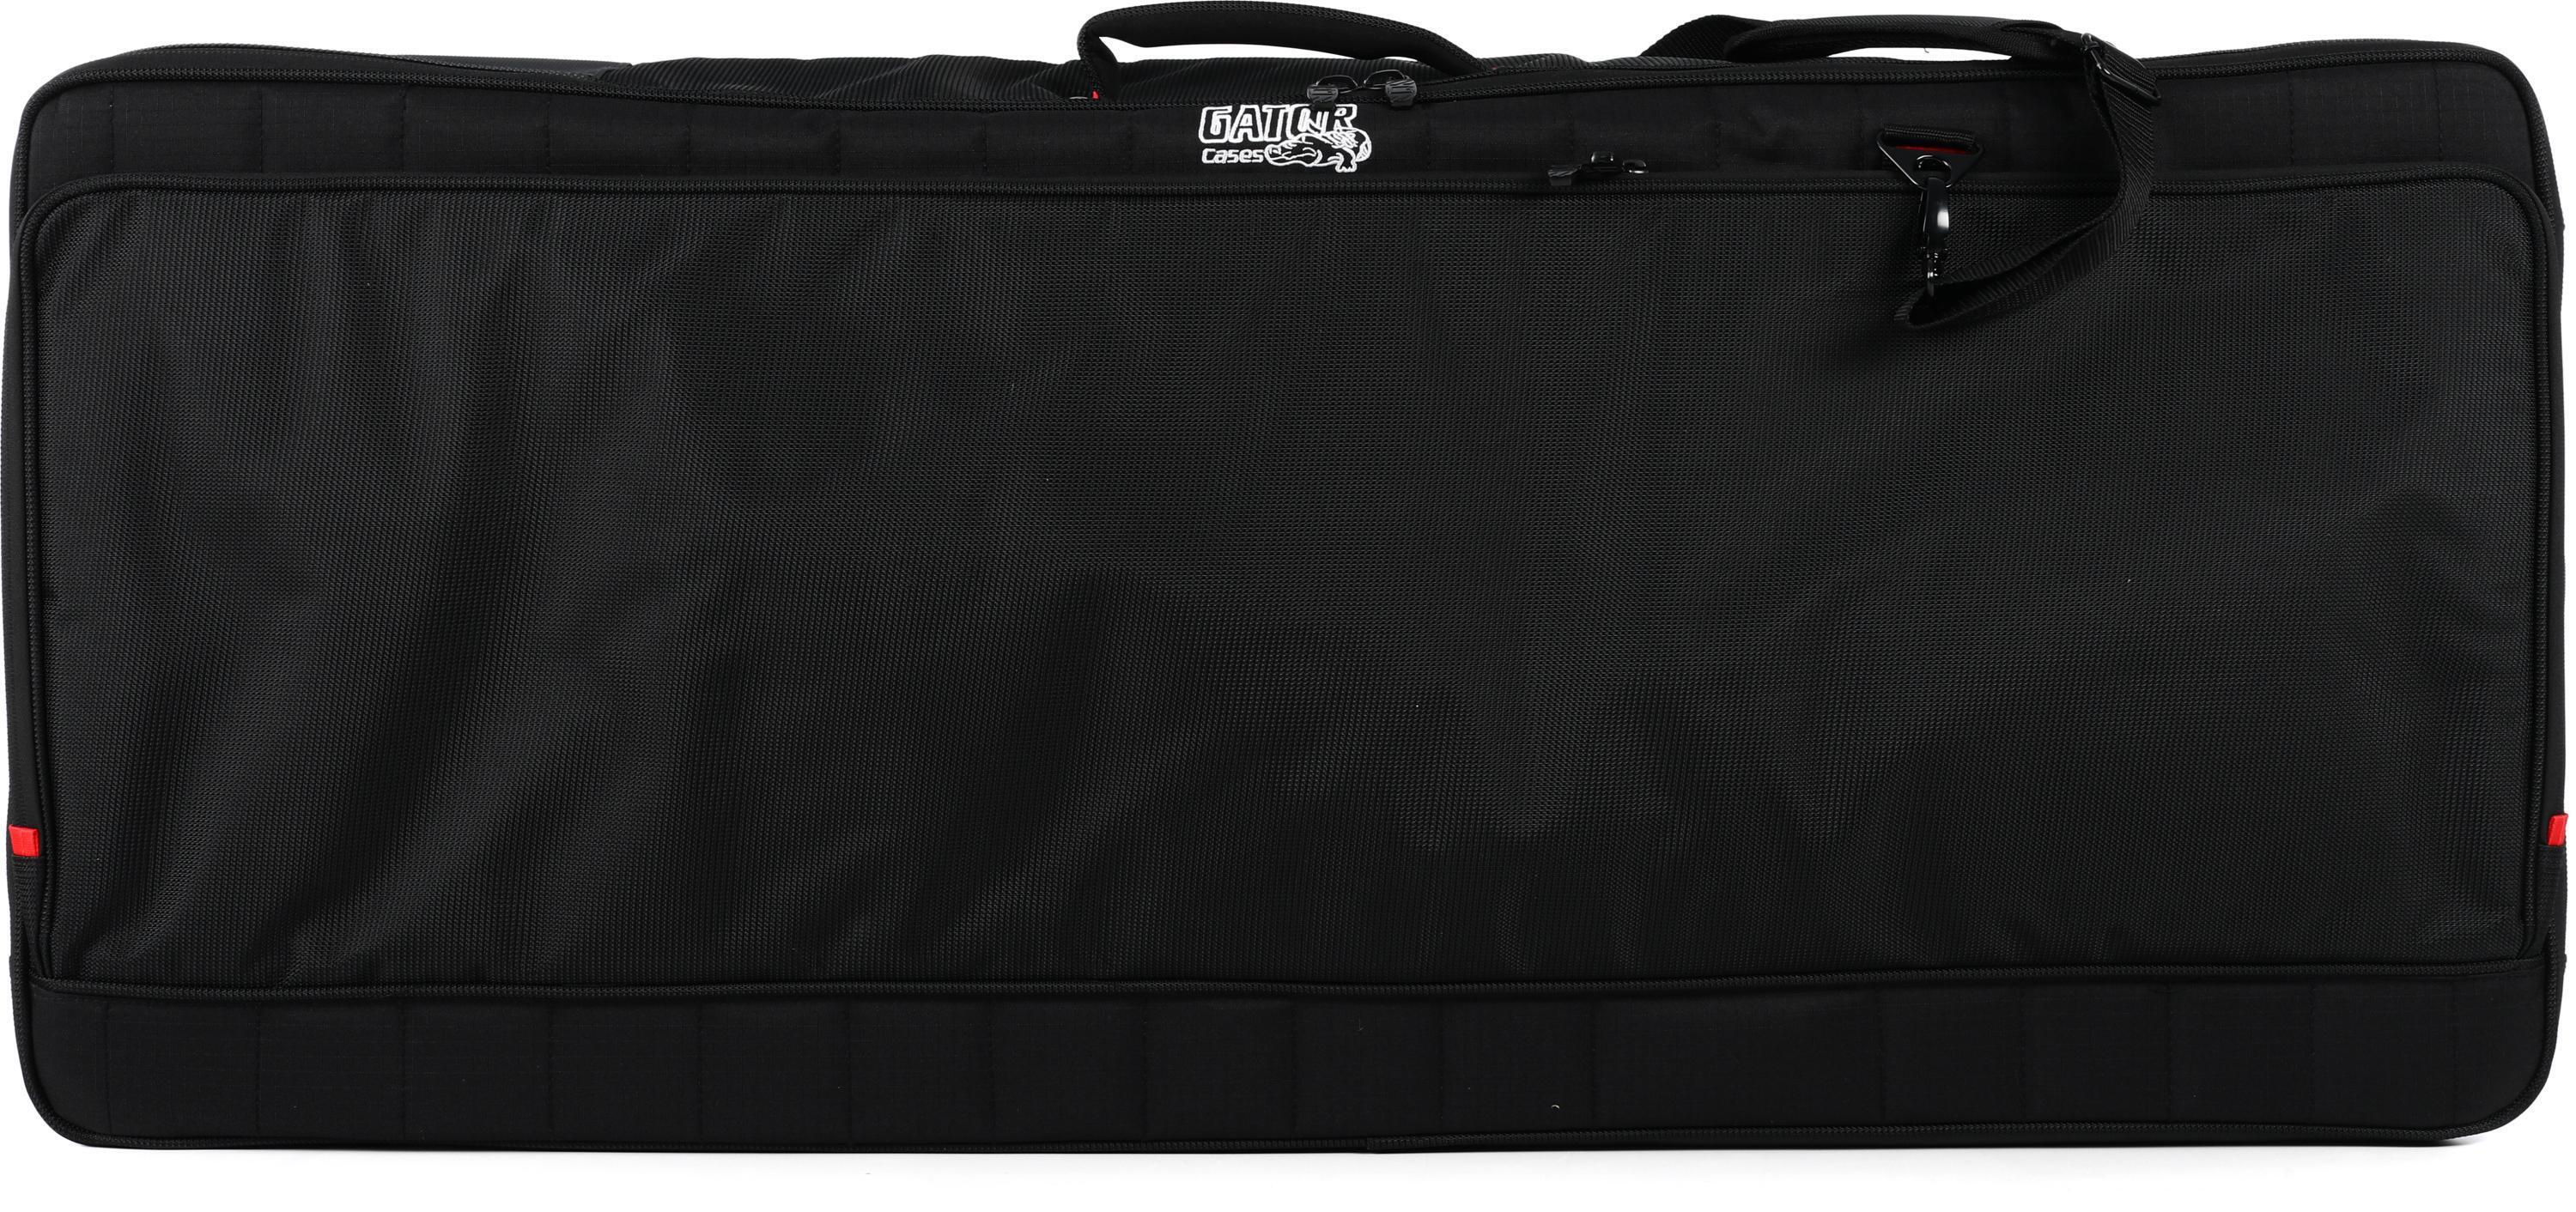 Luxe Series Keyboard Bag, 61 Key Large – Kaces Bags & Cases